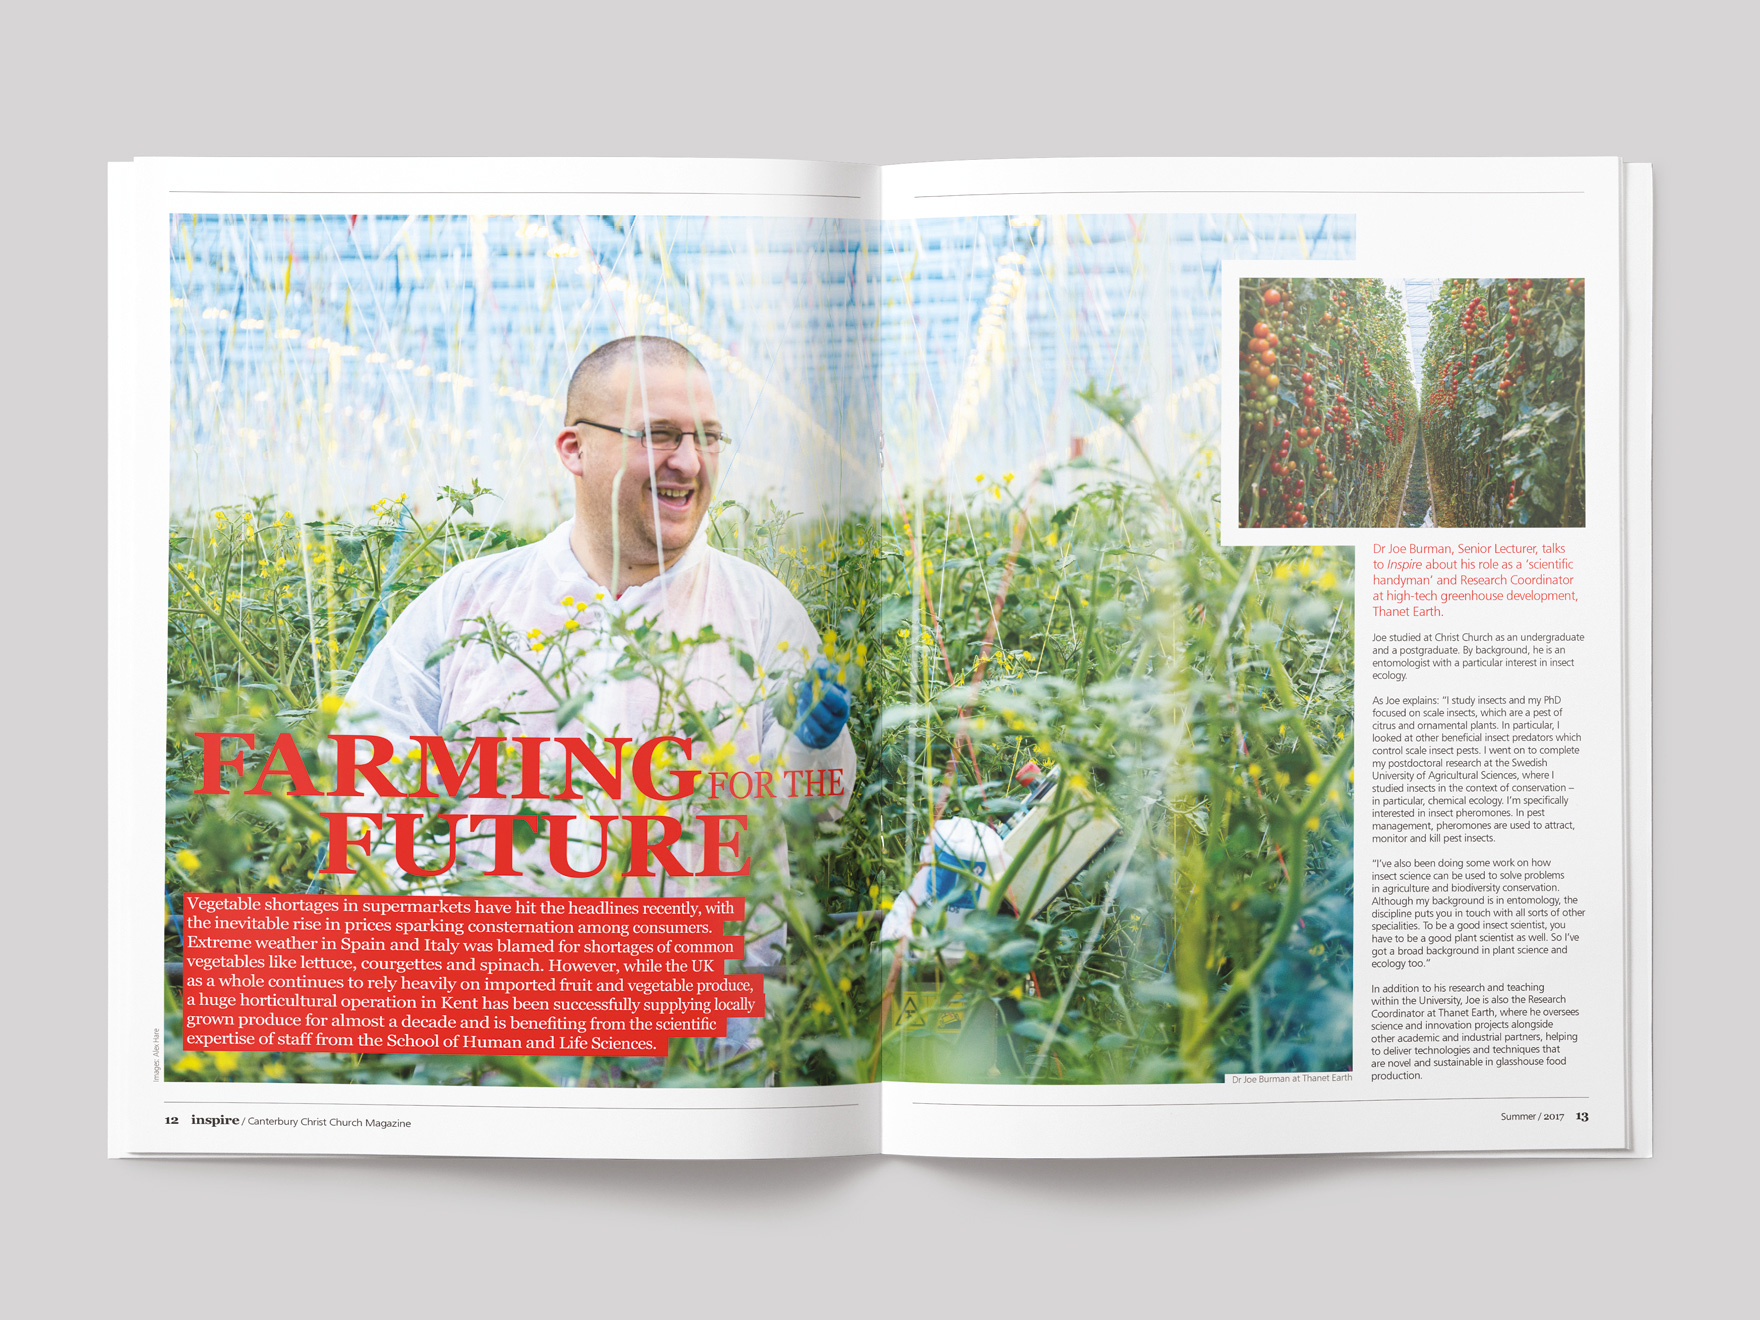 Inside pages from Inspire magazine, showing the opening pages of a feature on Farming for the Future